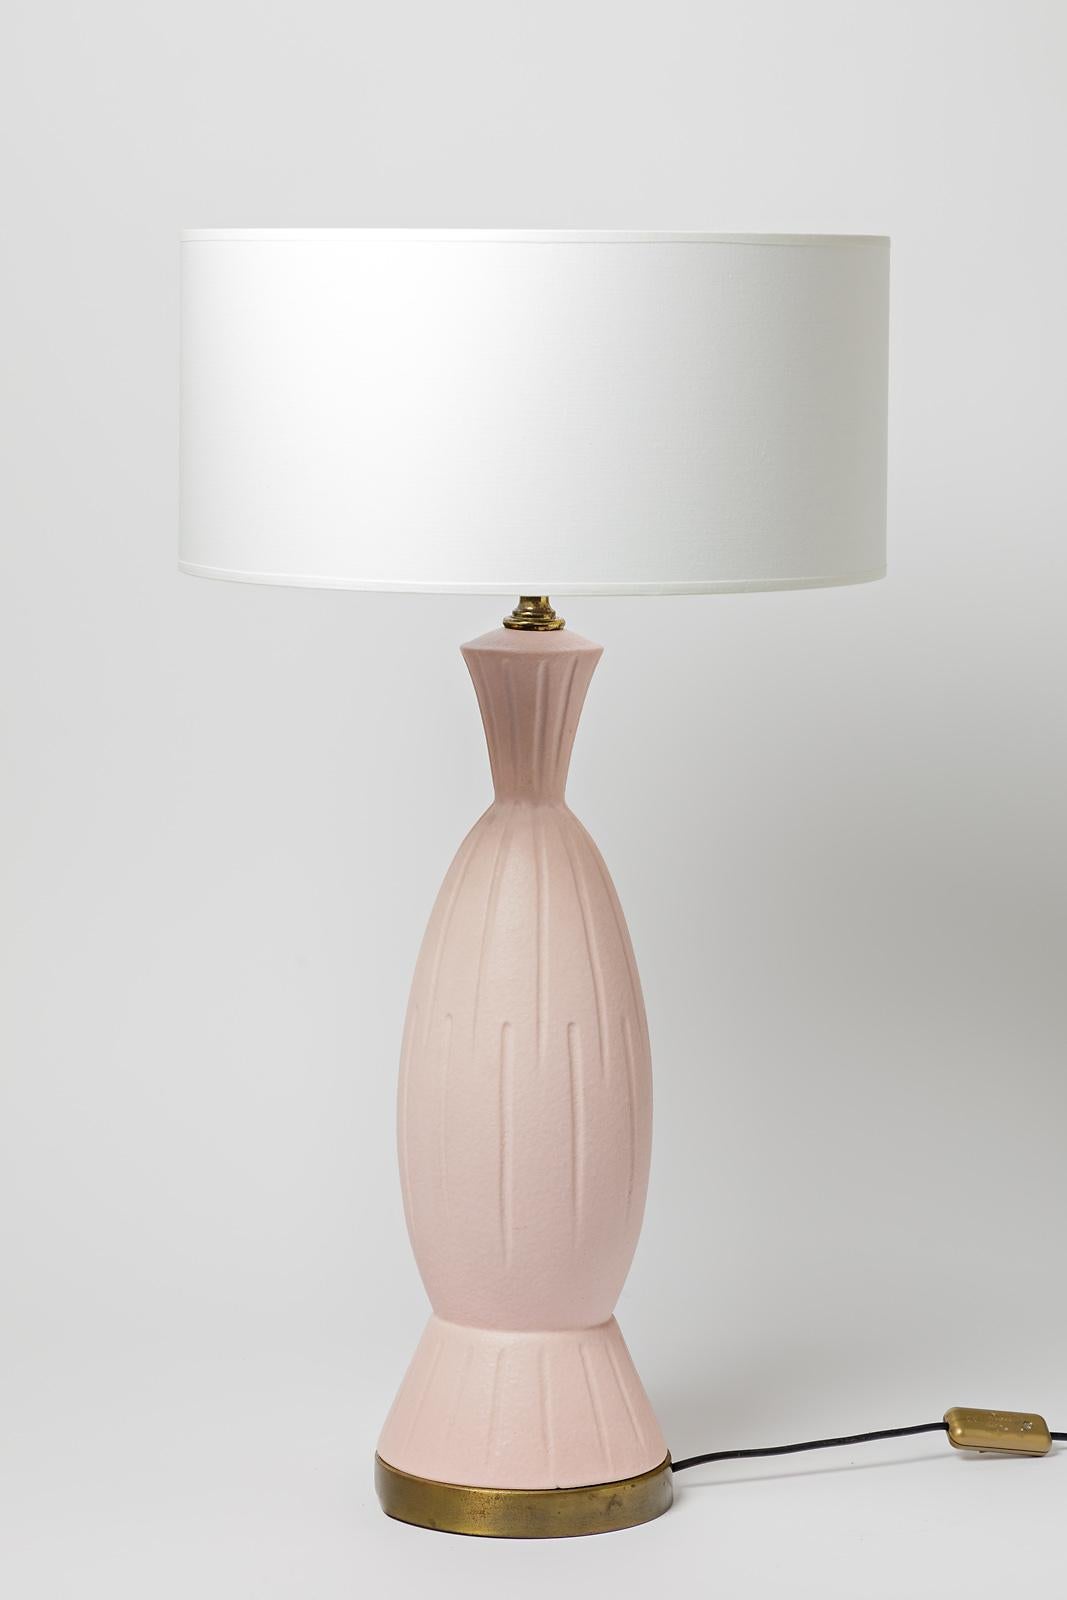 20th Century Pair of Light Pink Ceramic Table Lamps 20th Mid Century Design For Sale